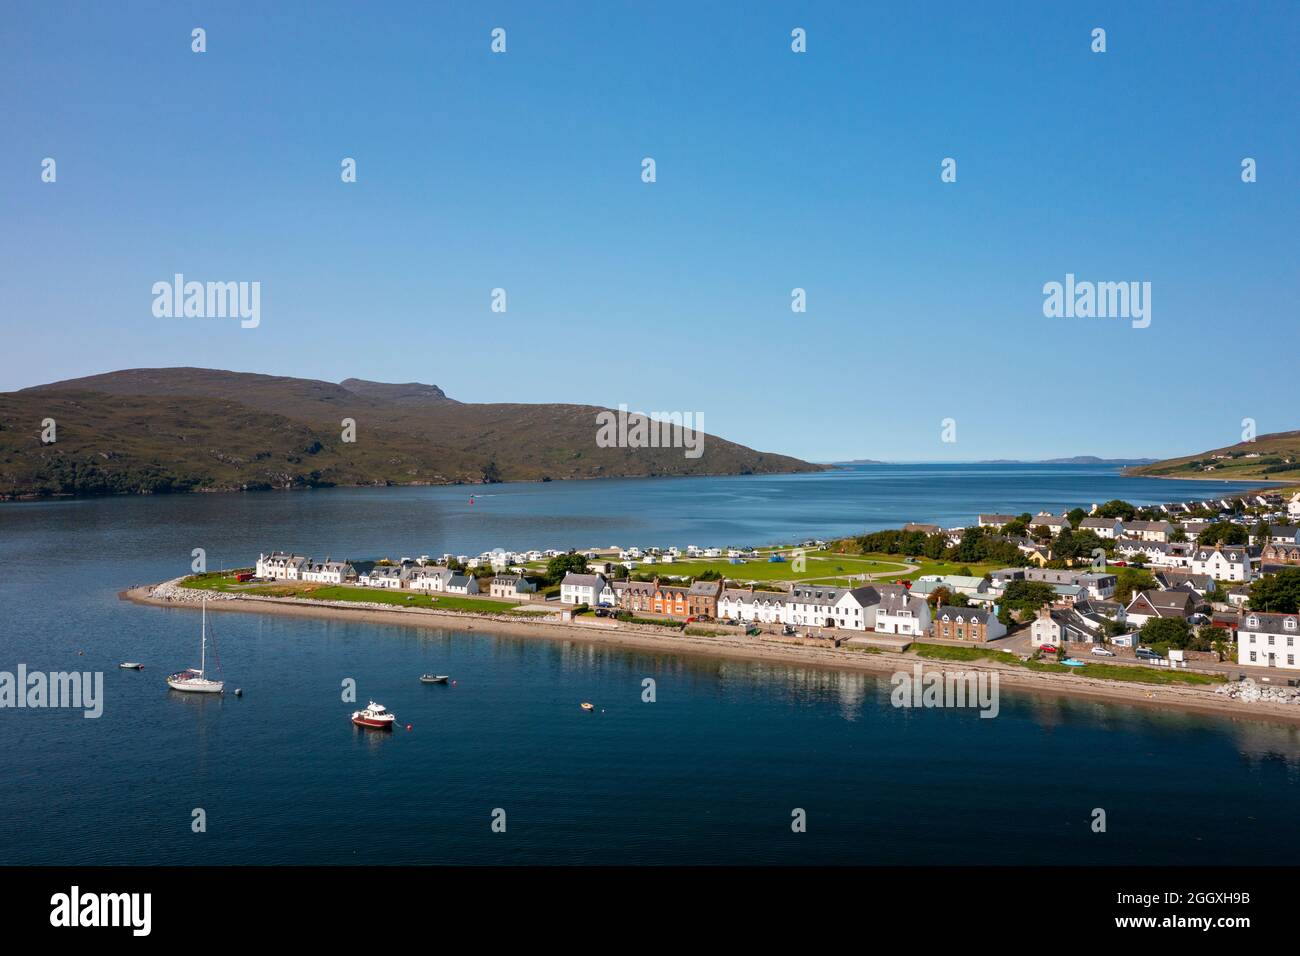 Aerial view from drone of town of Ullapool, Ross and Cromarty, Highland Region, Scotland, Uk Stock Photo